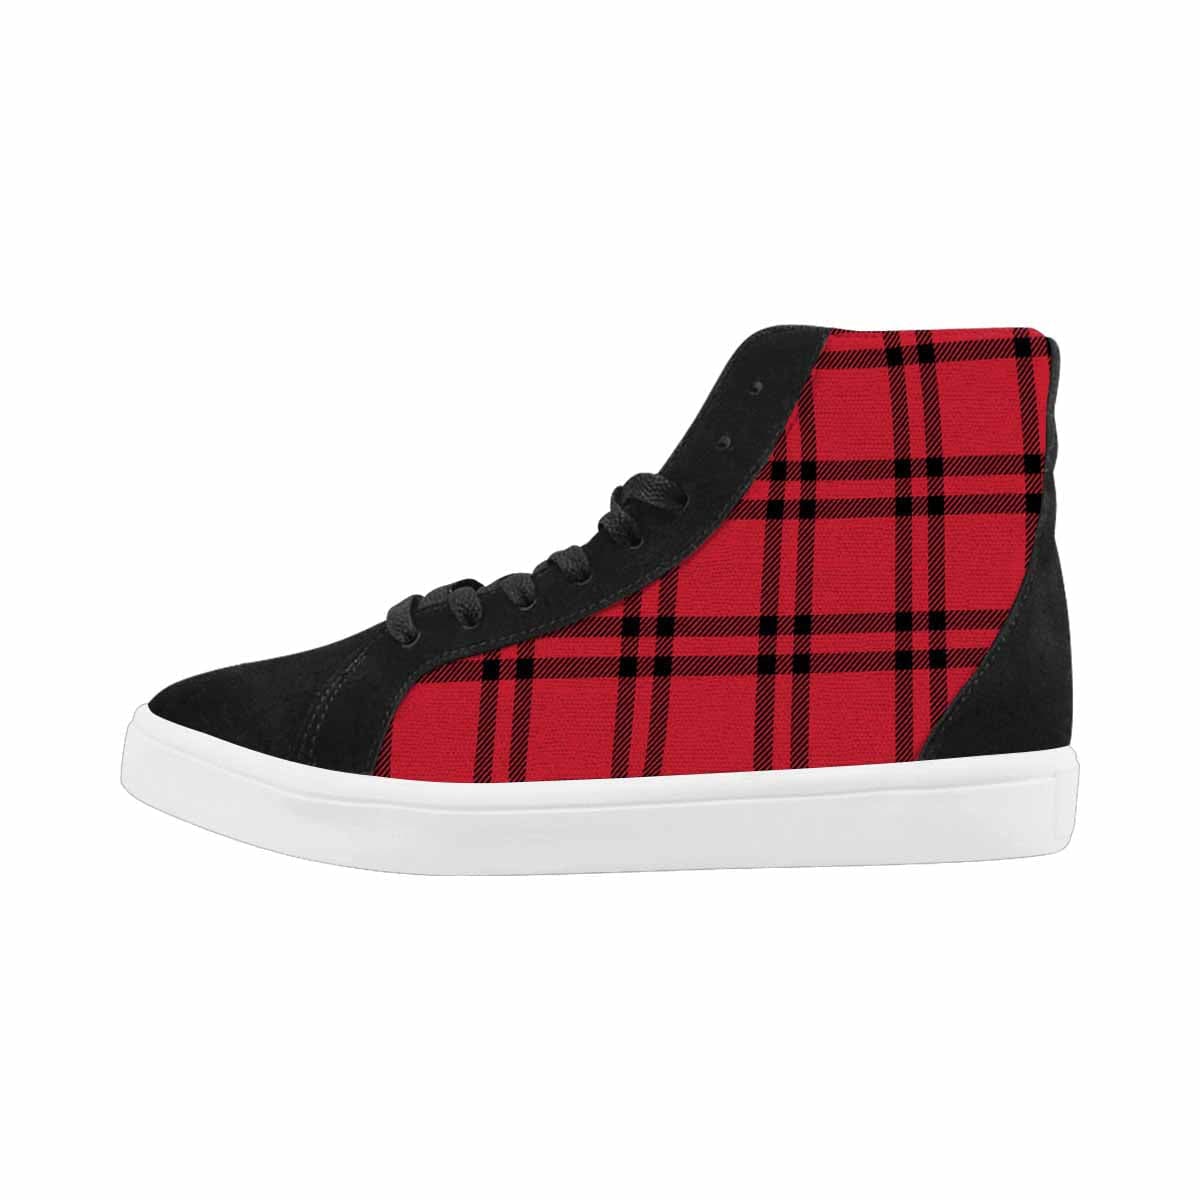 Uniquely You Sneakers for Women, Buffalo Plaid Red and Black - High Top Sports Shoes - Scarvesnthangs